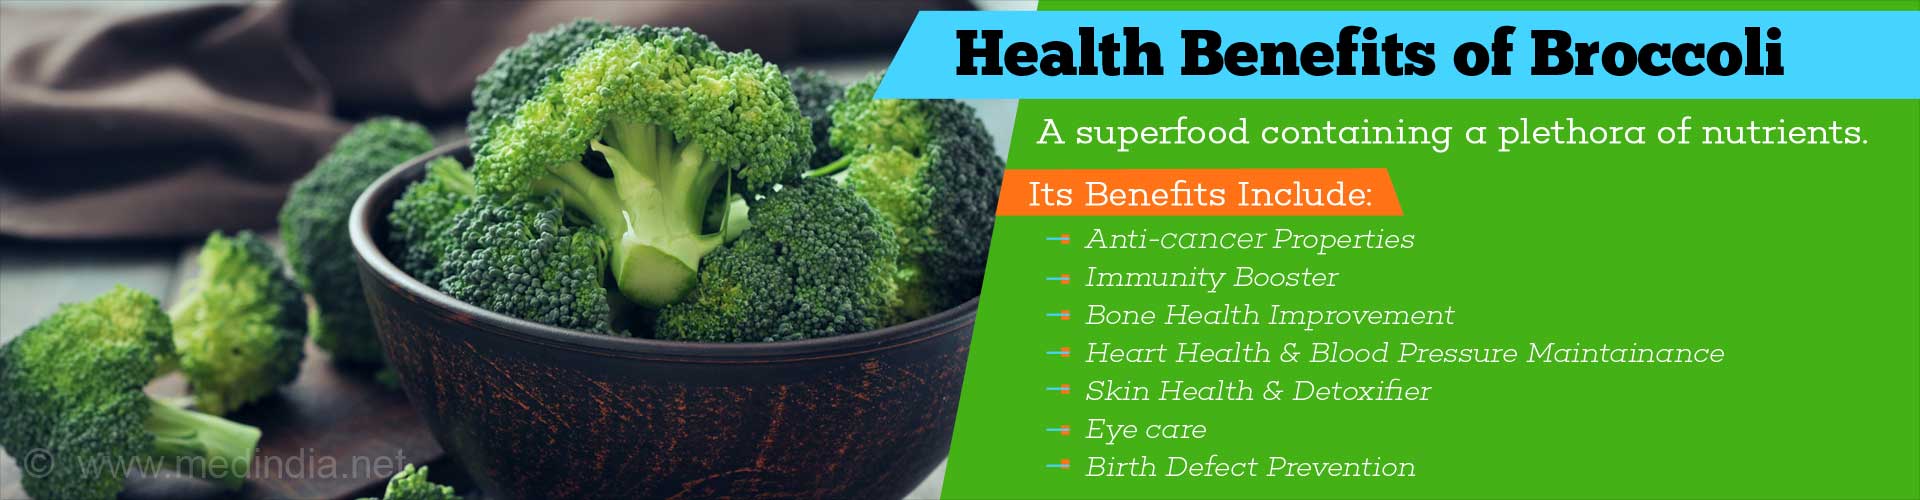 Health Benefits of Broccoli - A superfood containing a plethora of nutrients, it has myriad health benefits which have caught the attention of the general populace only in recent times.